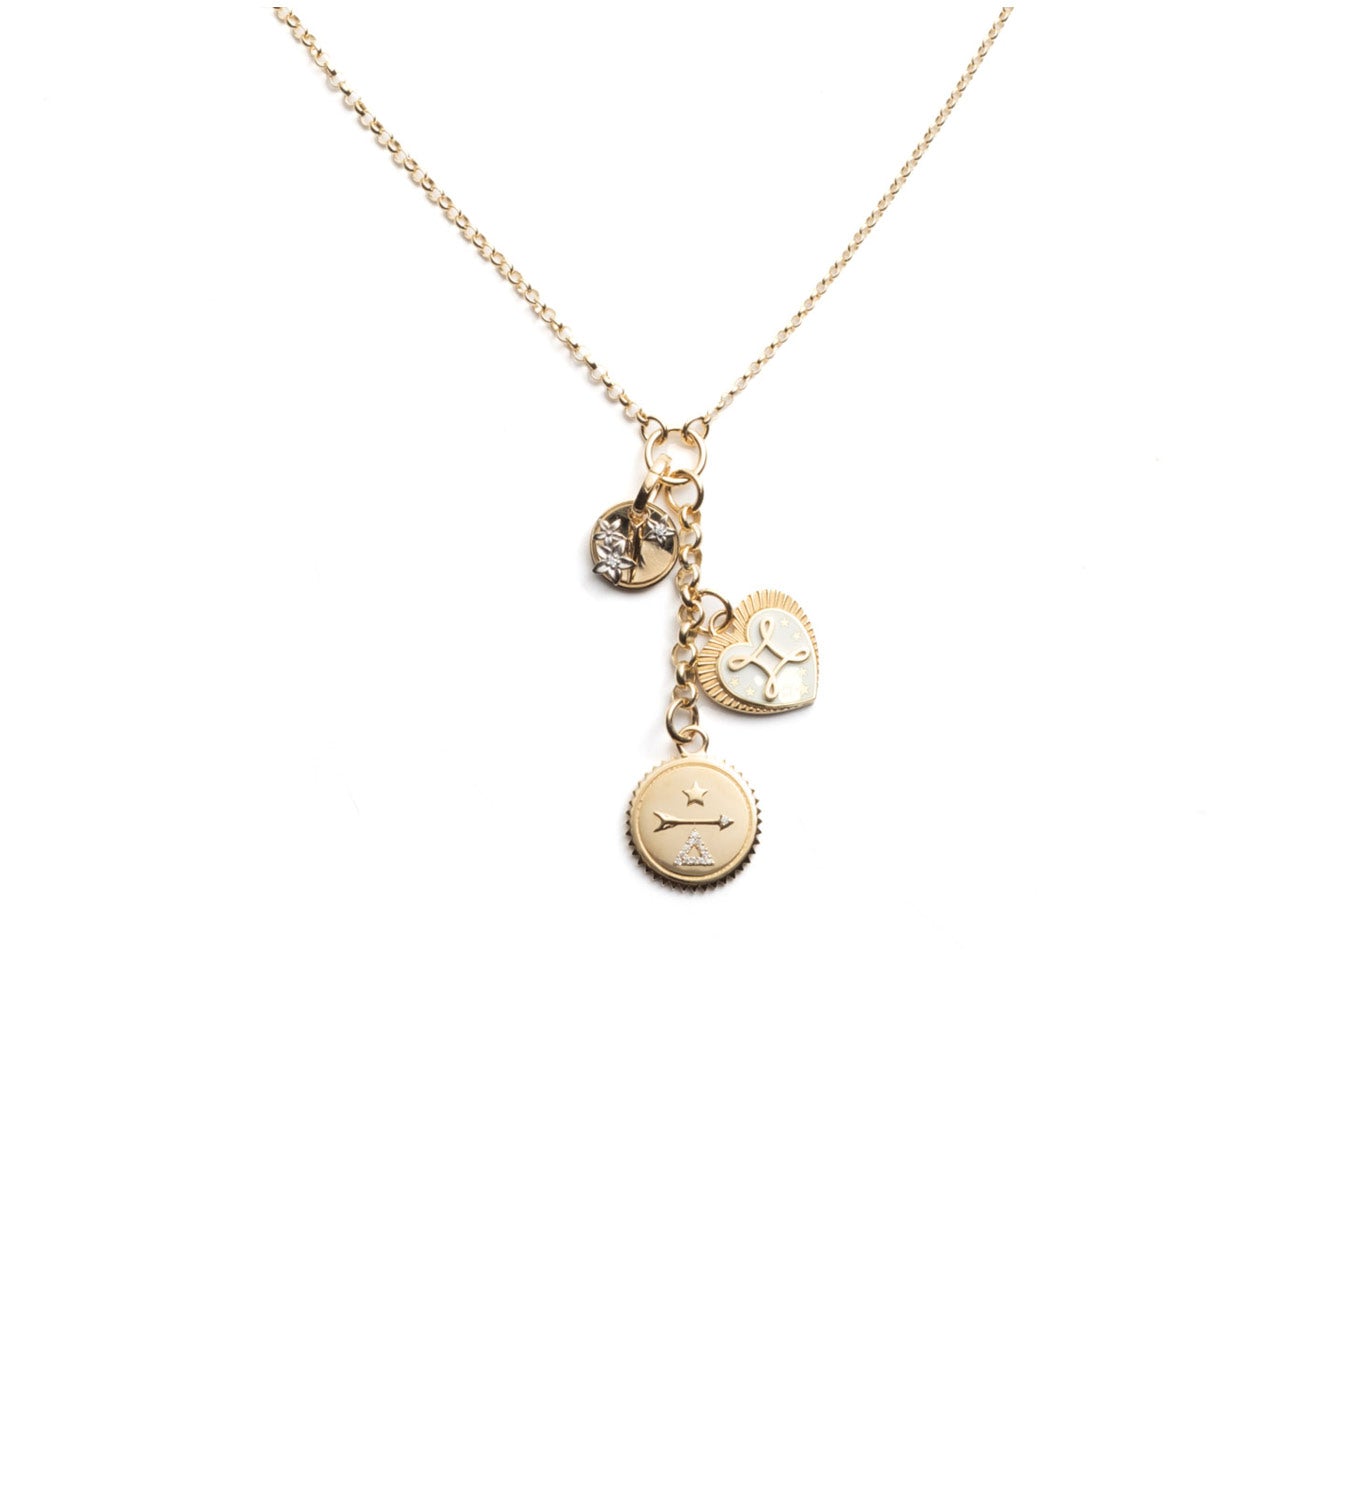 Dream, True Love & Resilience : Small Mixed Belcher Extension Necklace